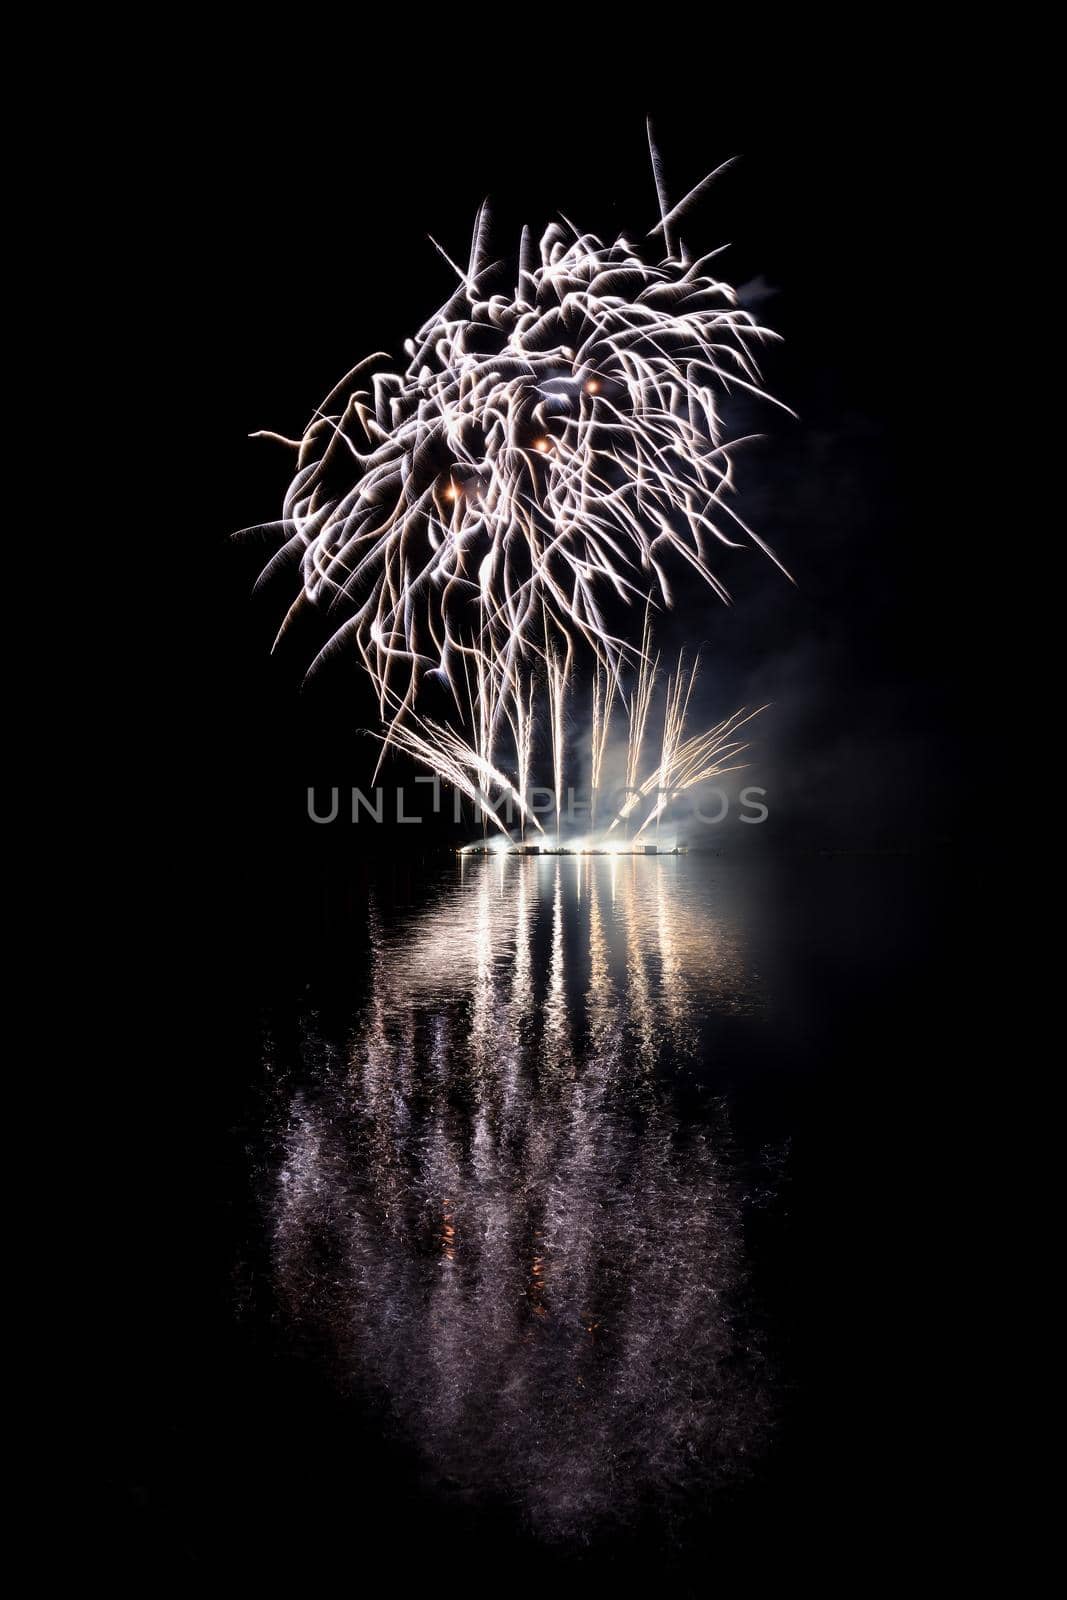 Beautiful colorful fireworks with reflections in water. Brno dam, the city of Brno-Europe. International Fireworks Competition. by Montypeter